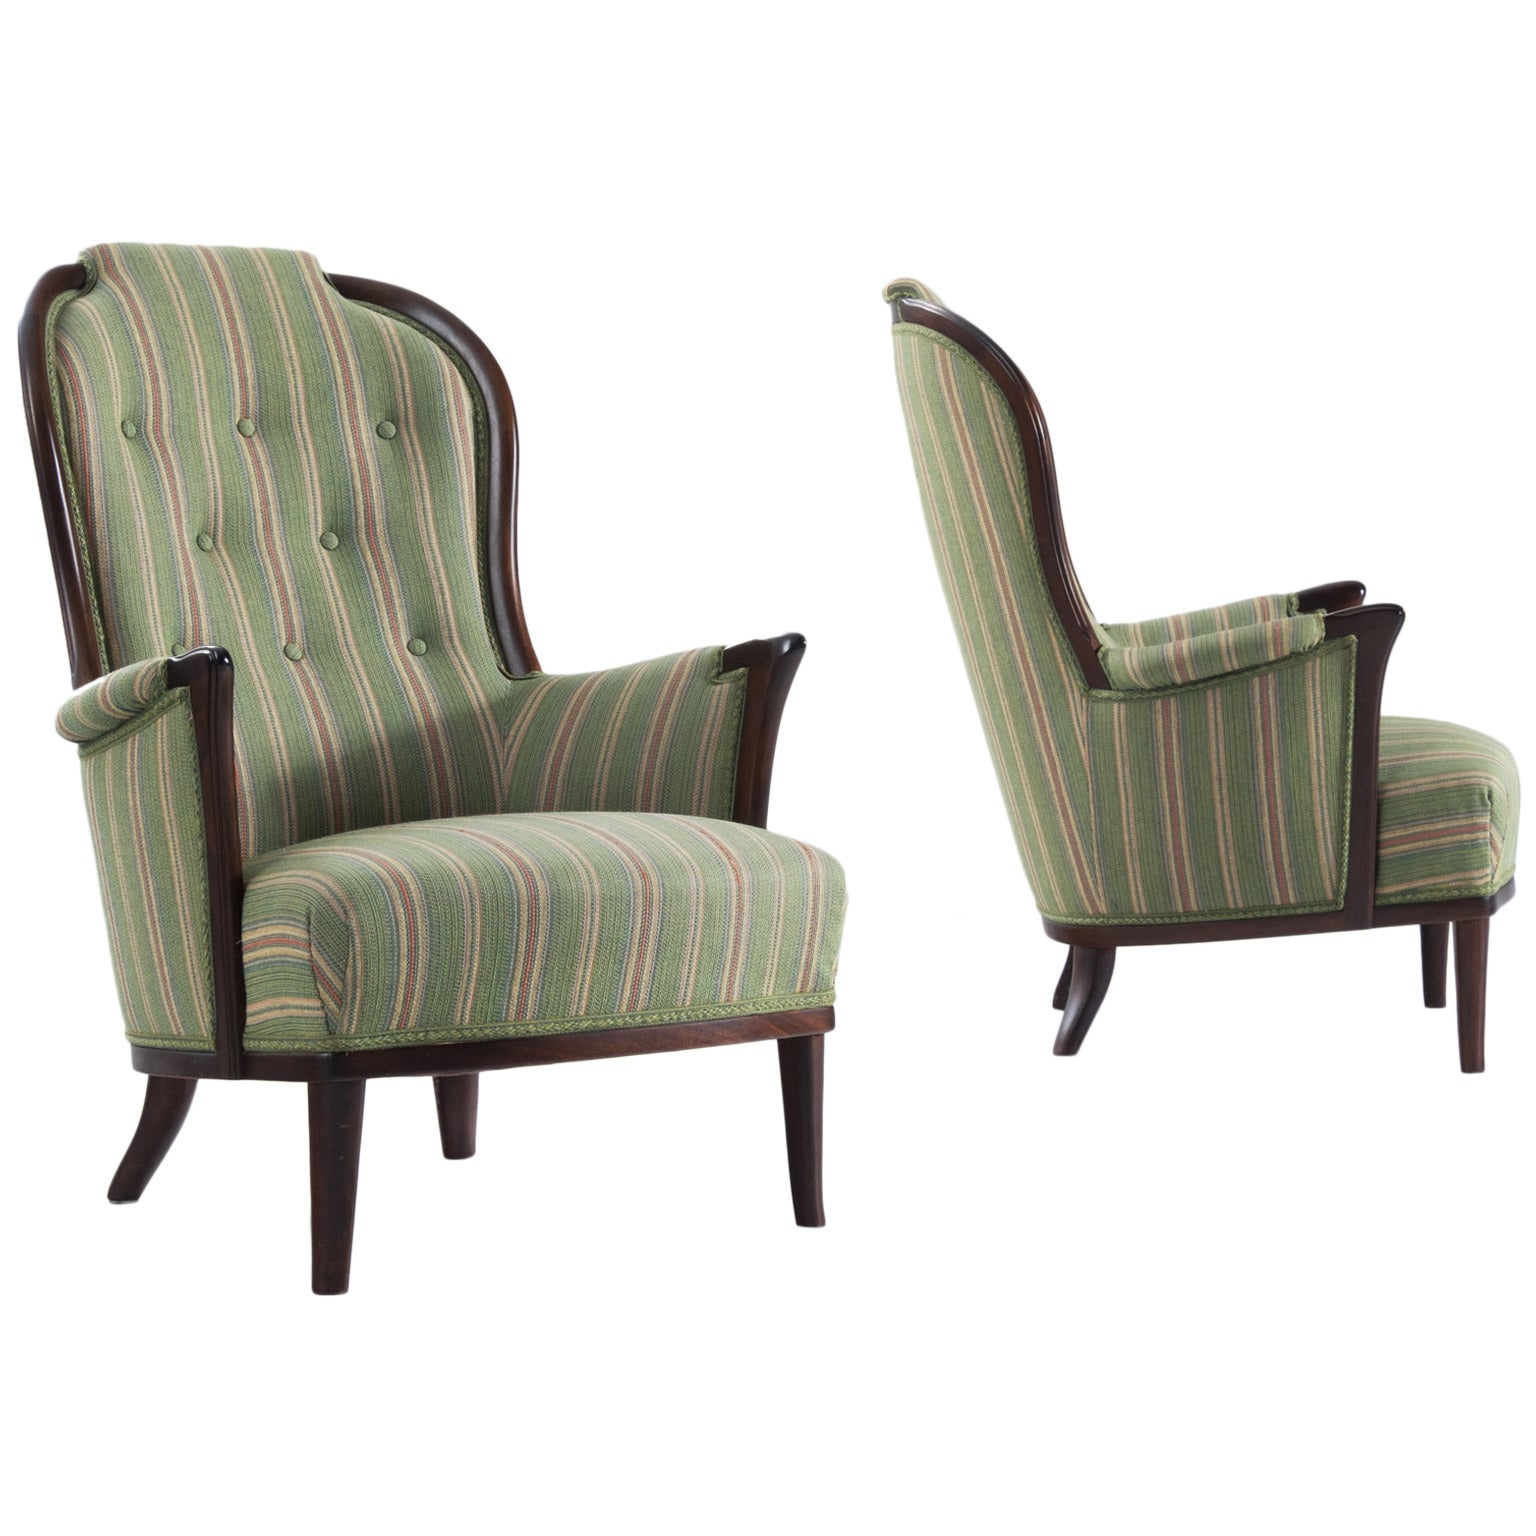 Carl Malmsten Pair of Lounge Chairs, Sweden